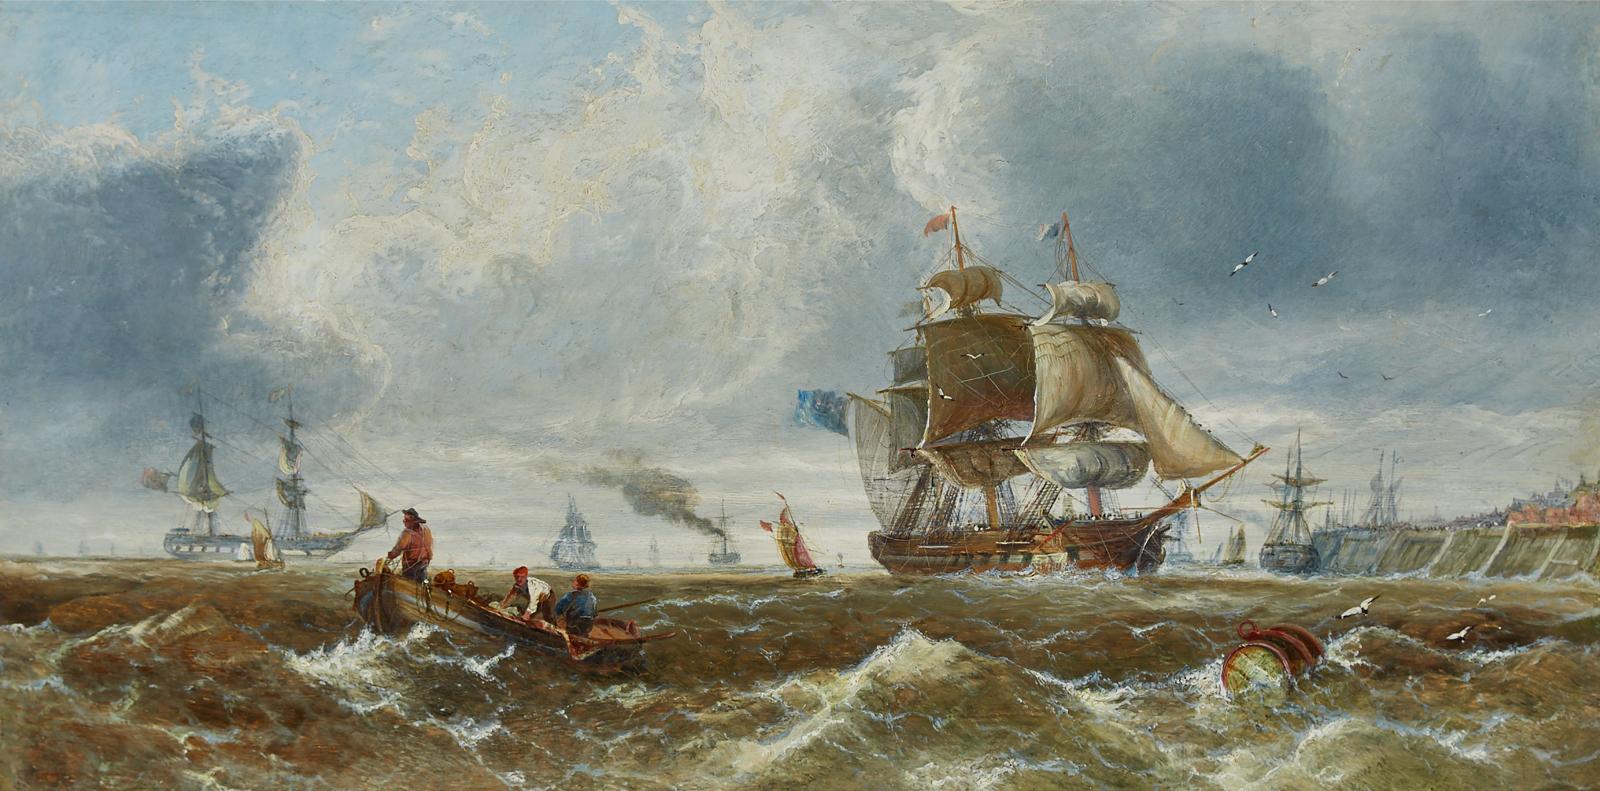 John Callow (1822-1878) - Man O' War In A Busy Channel; Men Boarding A Fishing Boat In A Channel With Masted Ships